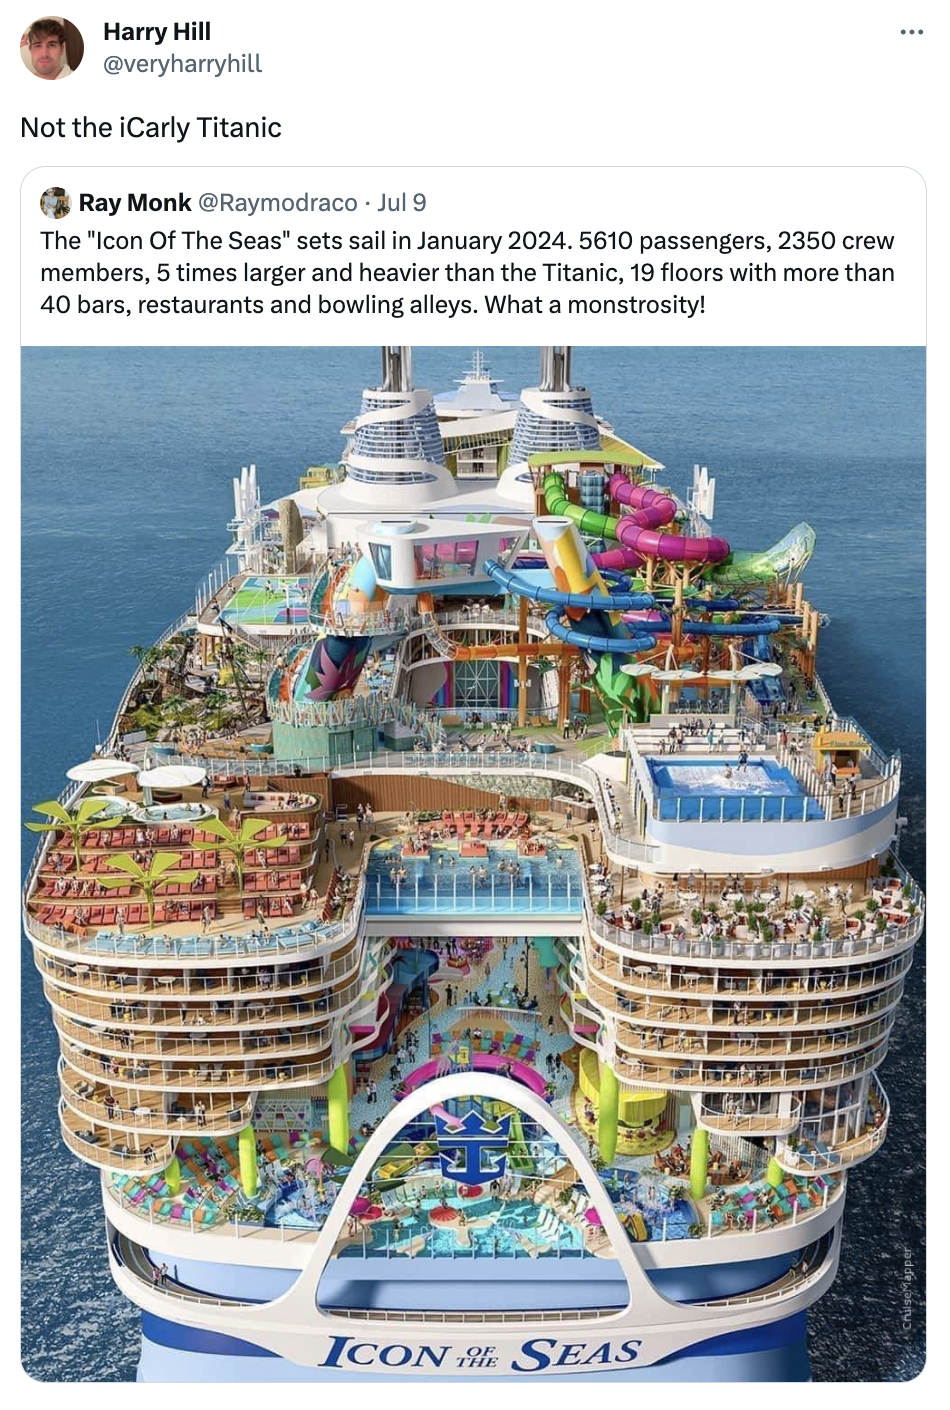 twitter highlights funny tweets  - biggest ship in the world compared - Harry Hill Not the iCarly Titanic Ray Monk Jul 9 The "Icon Of The Seas" sets sail in . 5610 passengers, 2350 crew members, 5 times larger and heavier than the Titanic, 19 floors with 